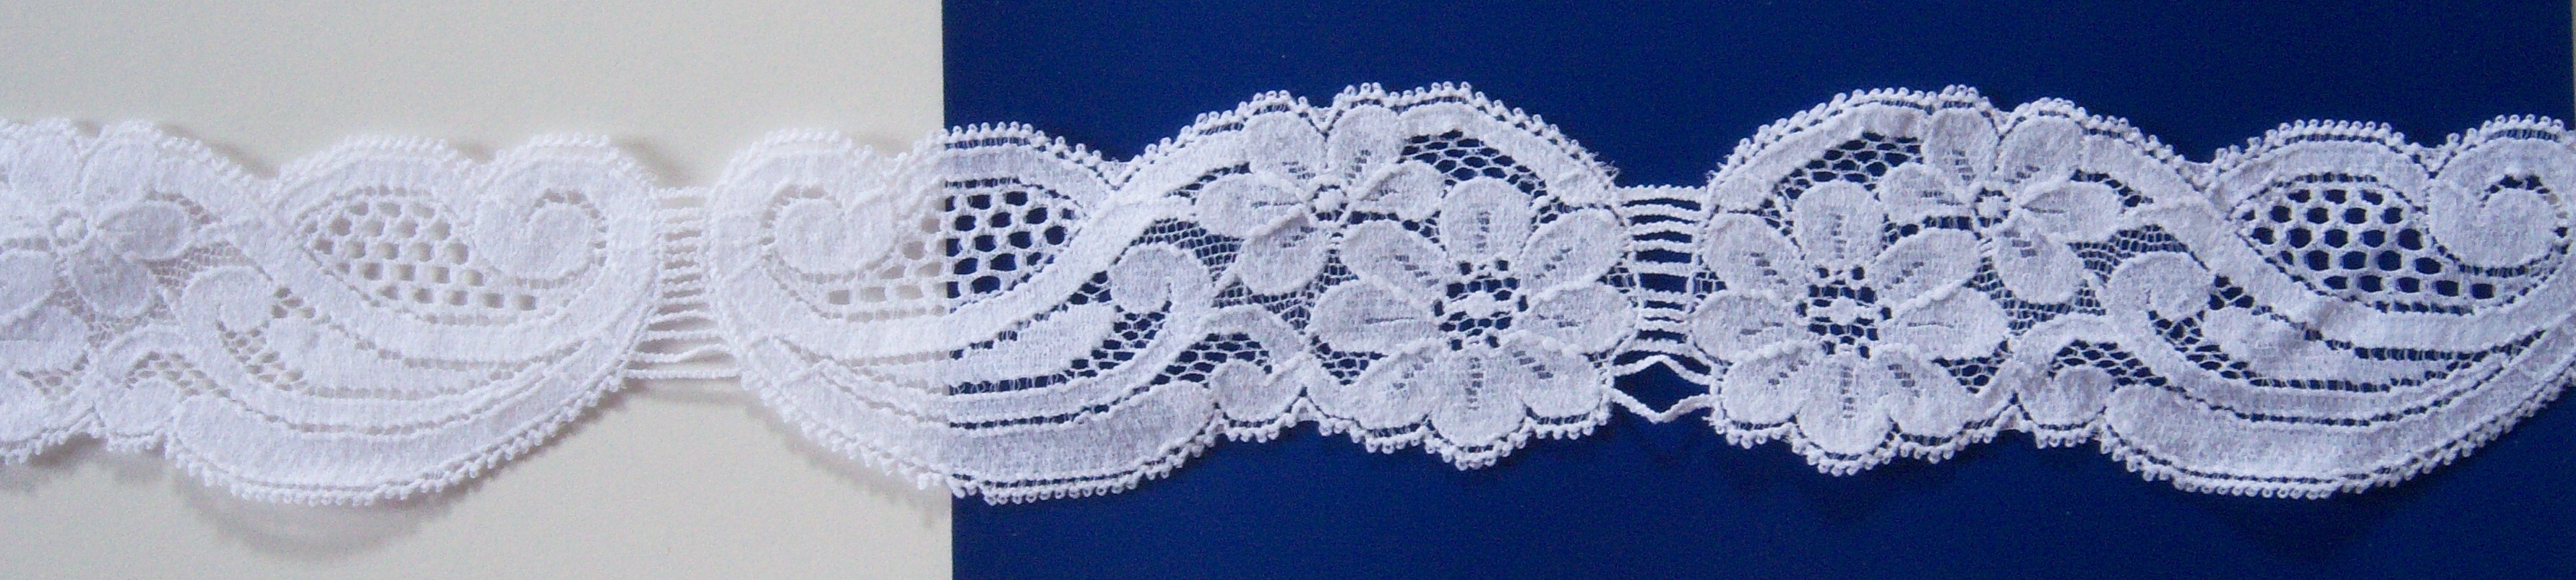 White 1 3/4" Stretch Lace Pairs